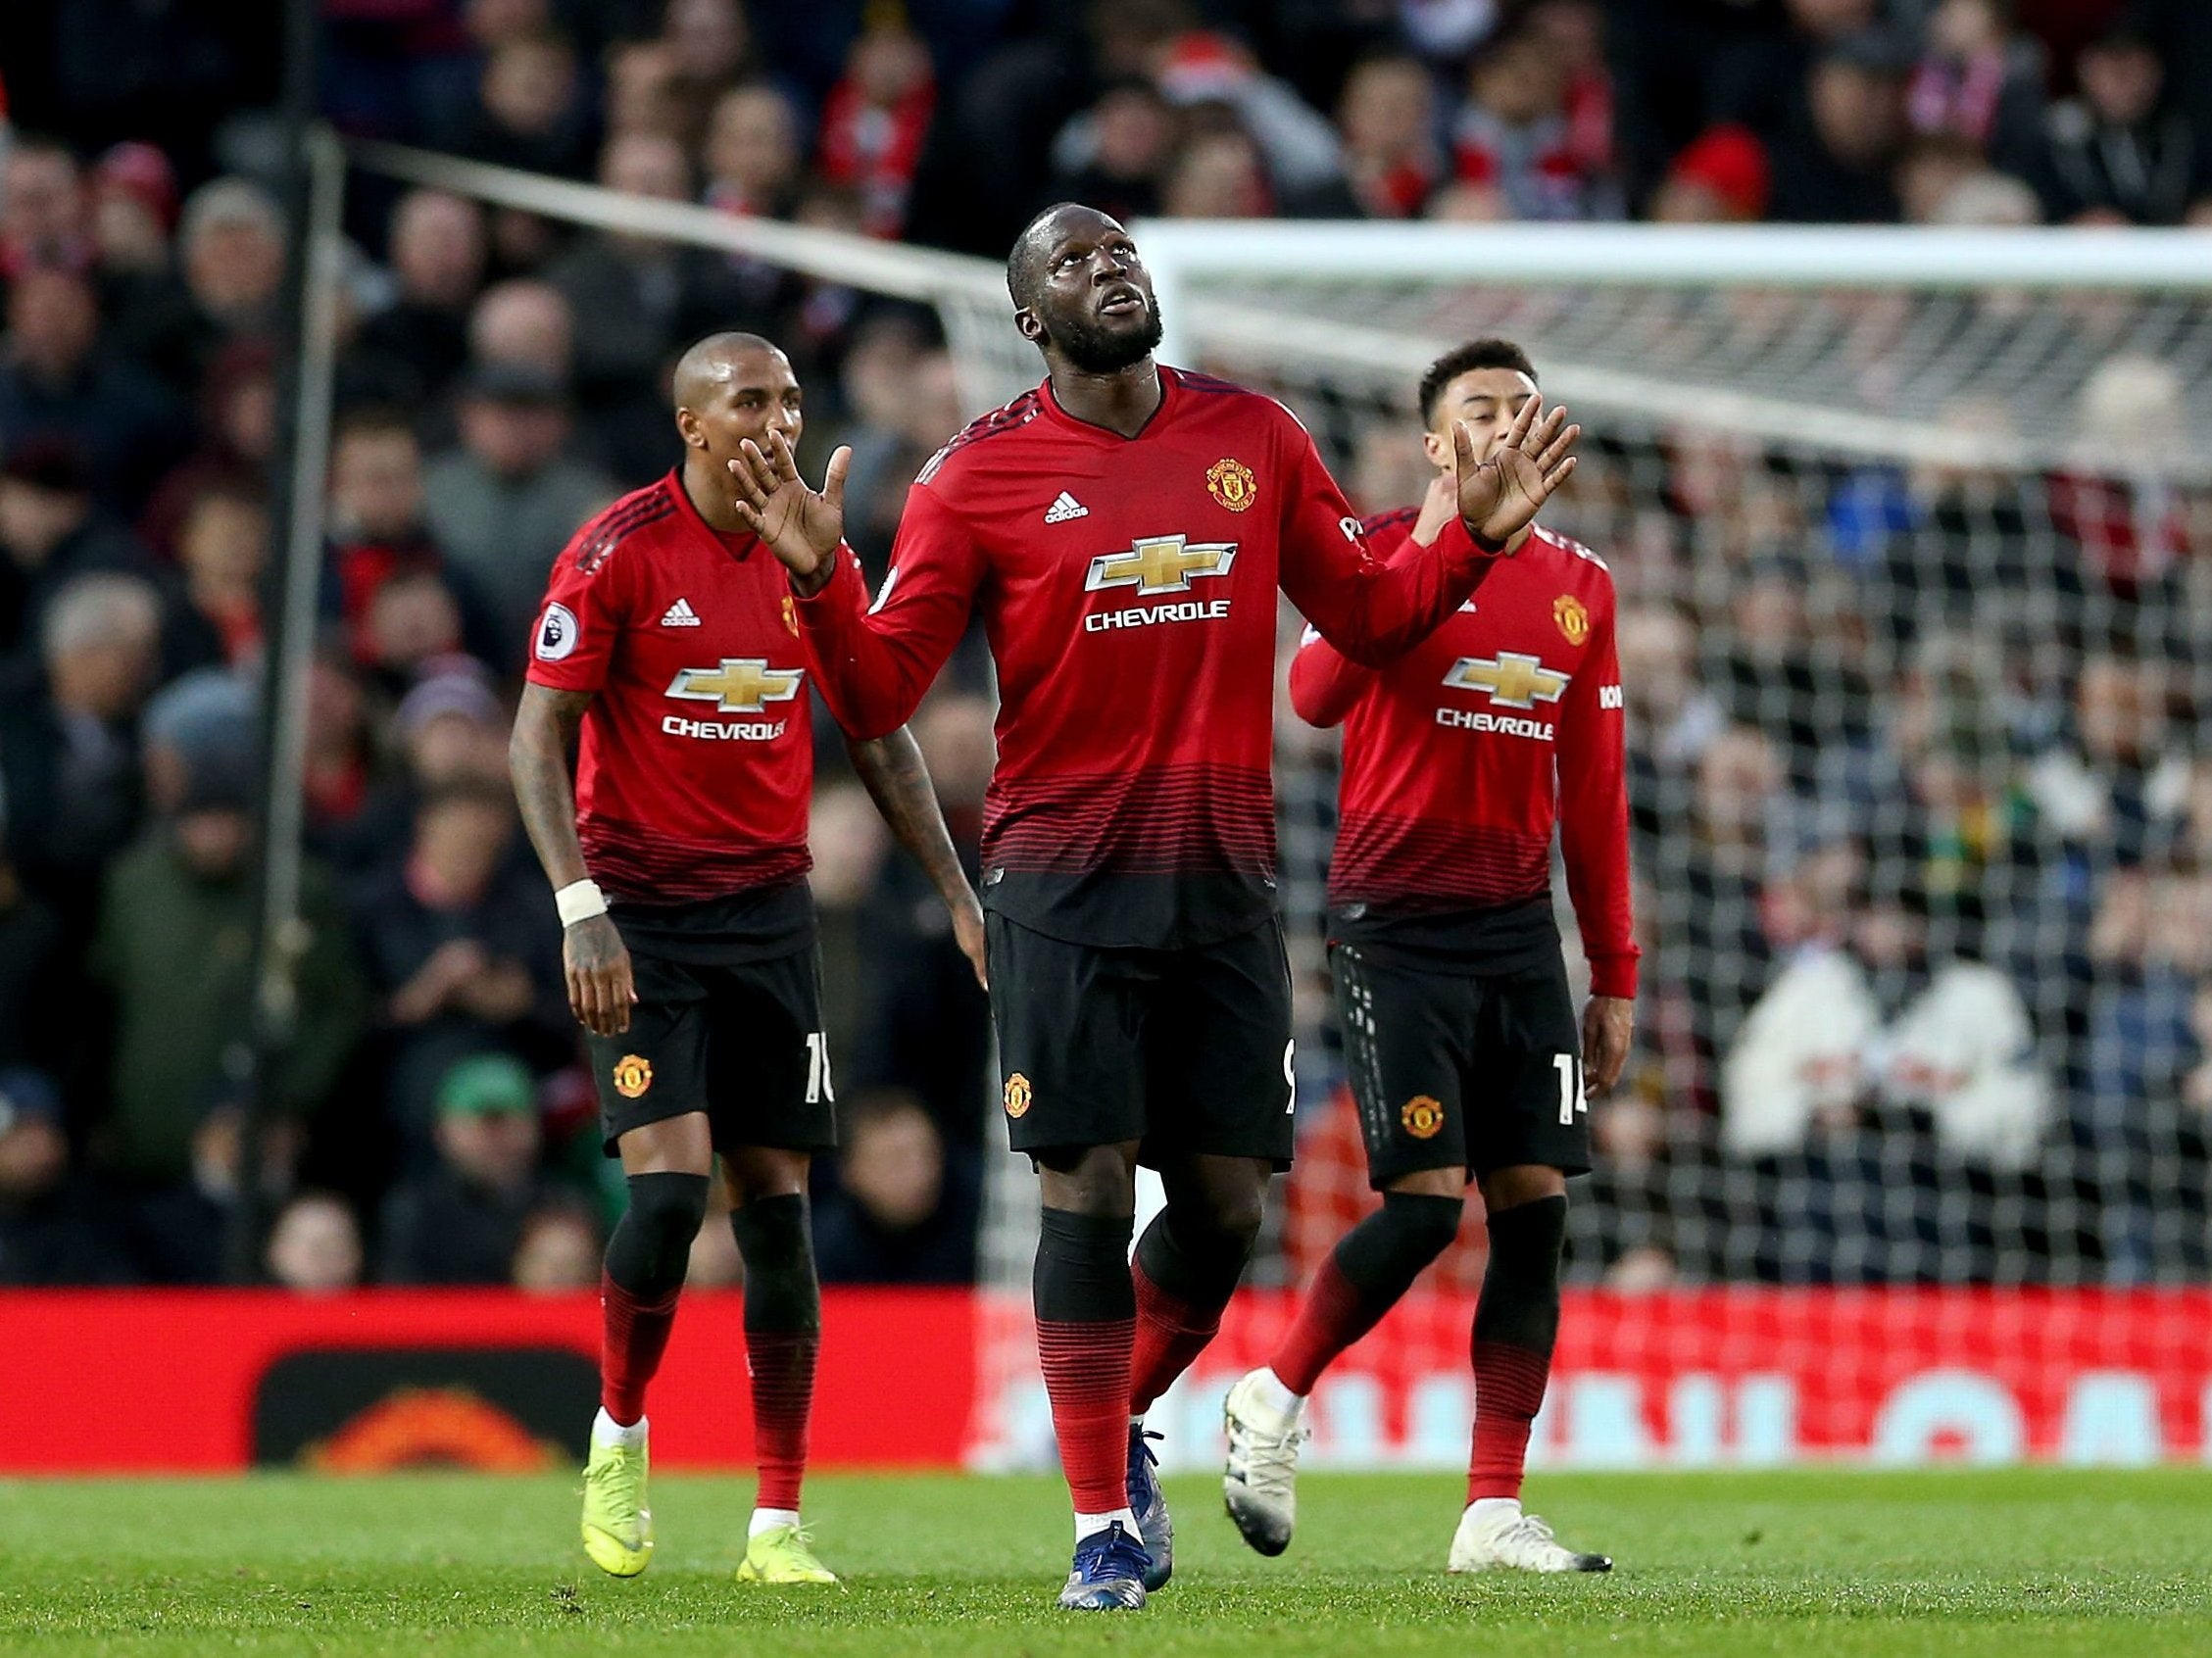 Romelu Lukaku gave Manchester United breathing space over Fulham with the third goal